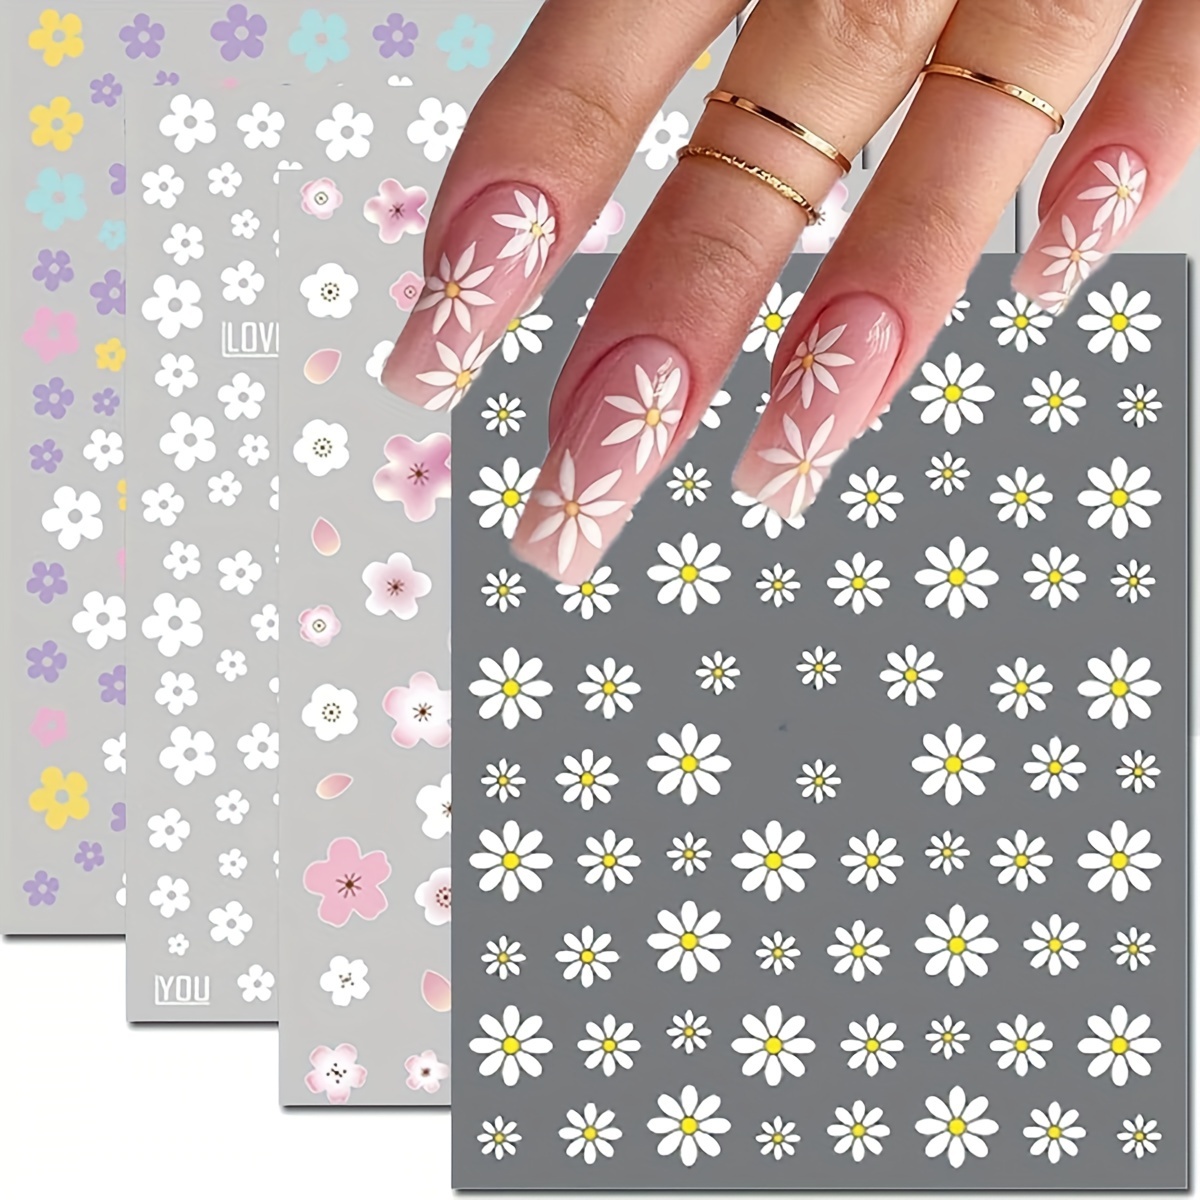 

6 Sheet 5d Embossed Daisy Design Nail Art Stickers, Flower Design Nail Art Decals For Nail Art Decoration, Self Adhesive Nail Art Supplies For Women And Girls